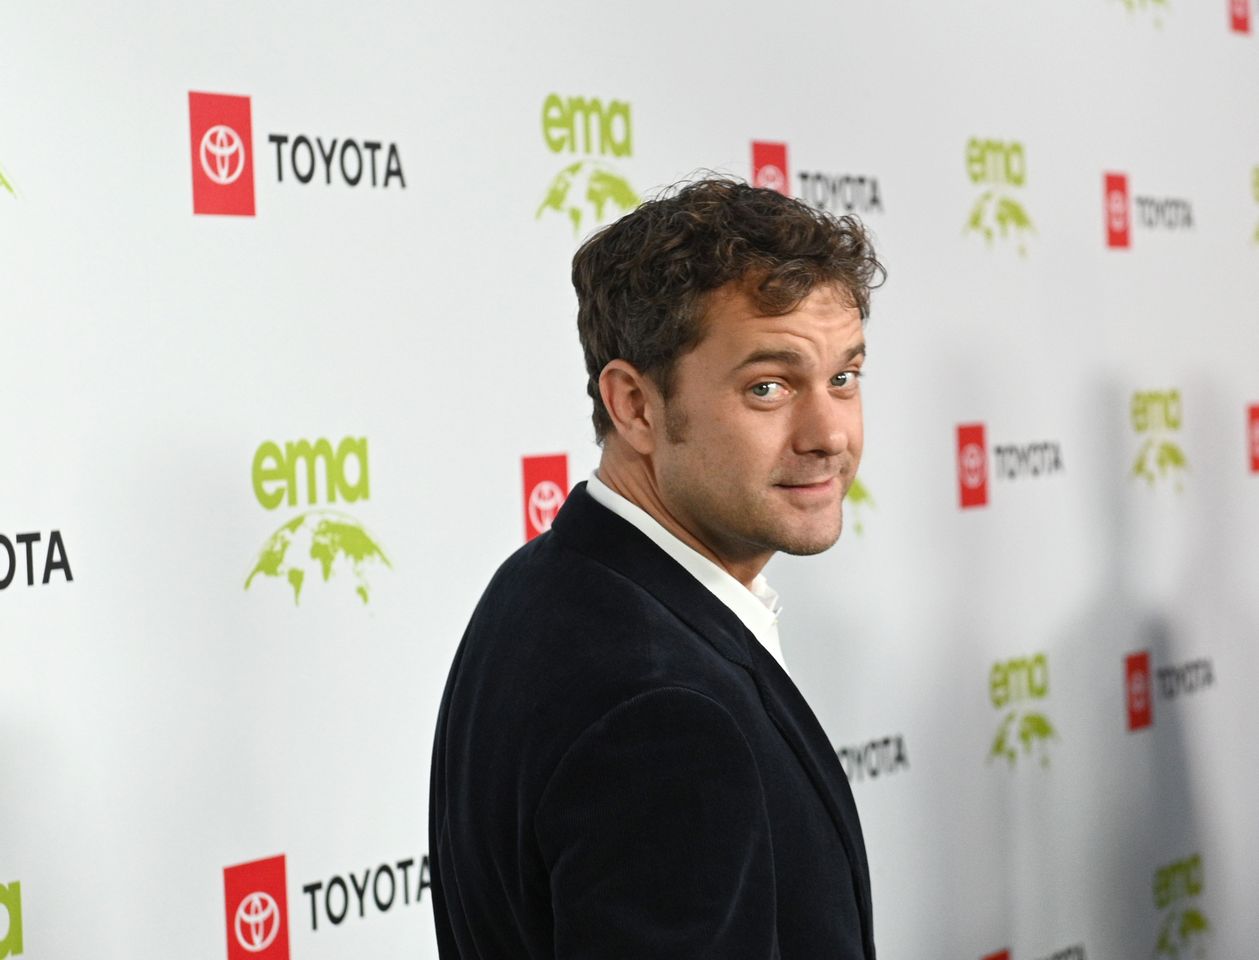 Joshua Jackson at the Environmental Media Association 2nd Annual Honors Benefit Gala at Private Residence on September 28, 2019 in Pacific Palisades, California. | Source: Getty Images